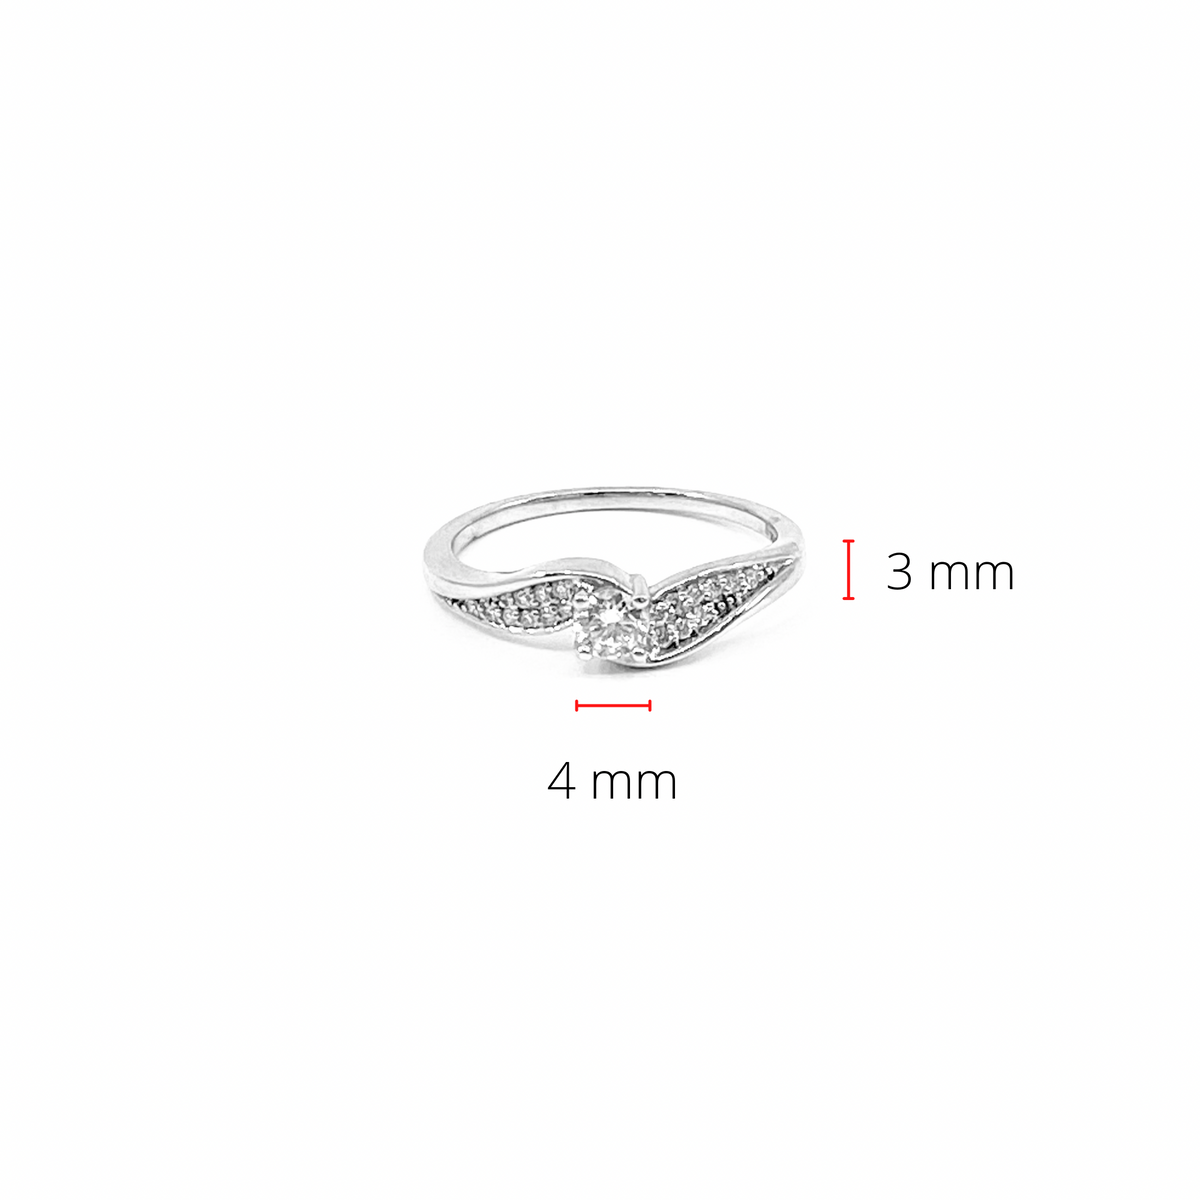 10K White Gold 0.25cttw Canadian Diamond Engagement Ring, size 6.5